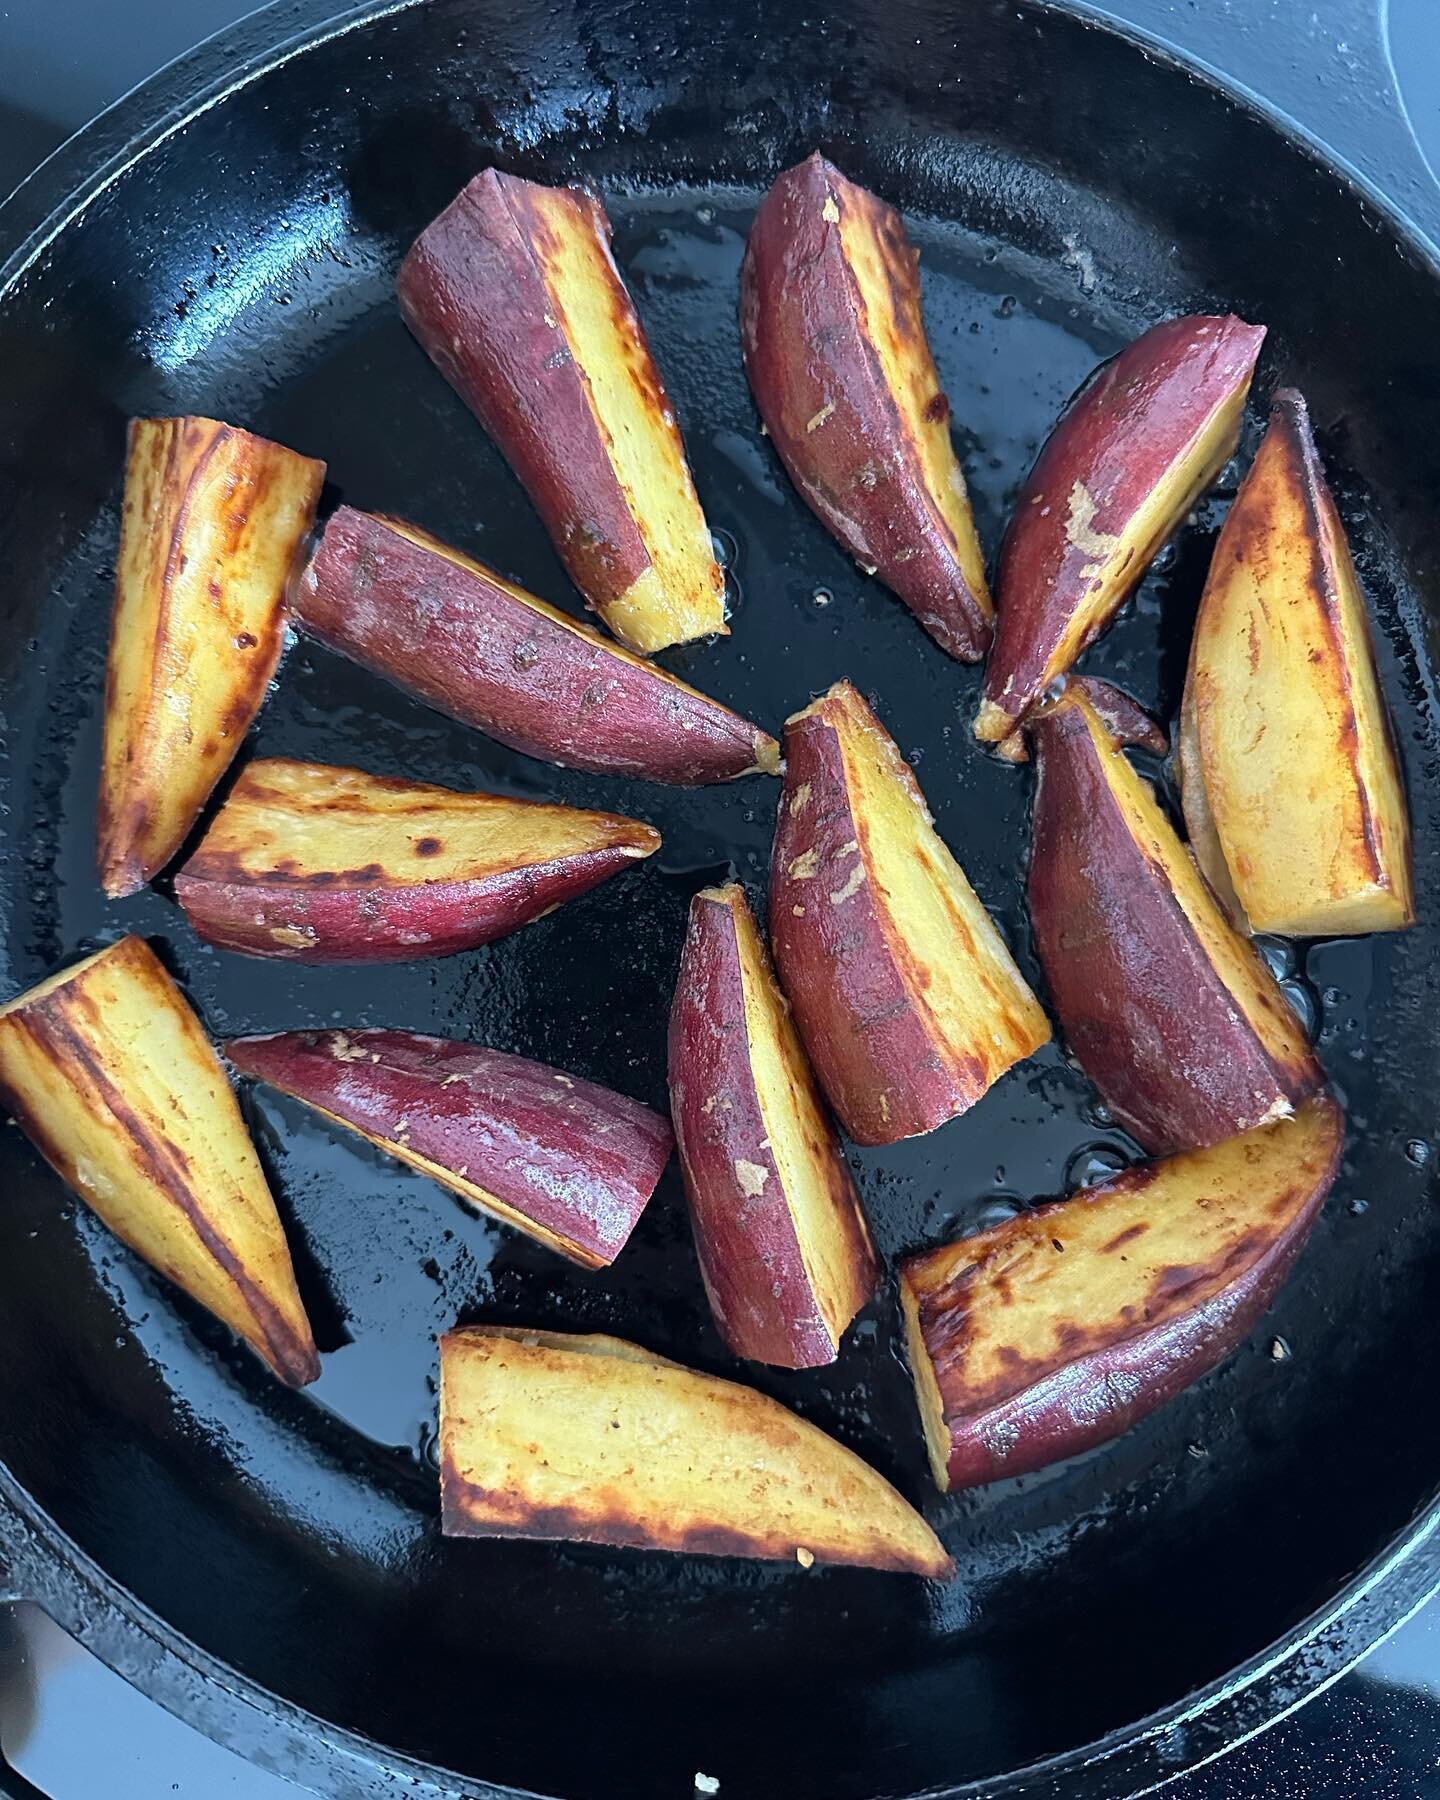 The secret to making the best Japanese sweet potatoes you&rsquo;ve ever tasted is to first steam them whole until they are fully cooked through. Then cut them into spears for searing. We used avocado oil which has a high smoke point and seared out po